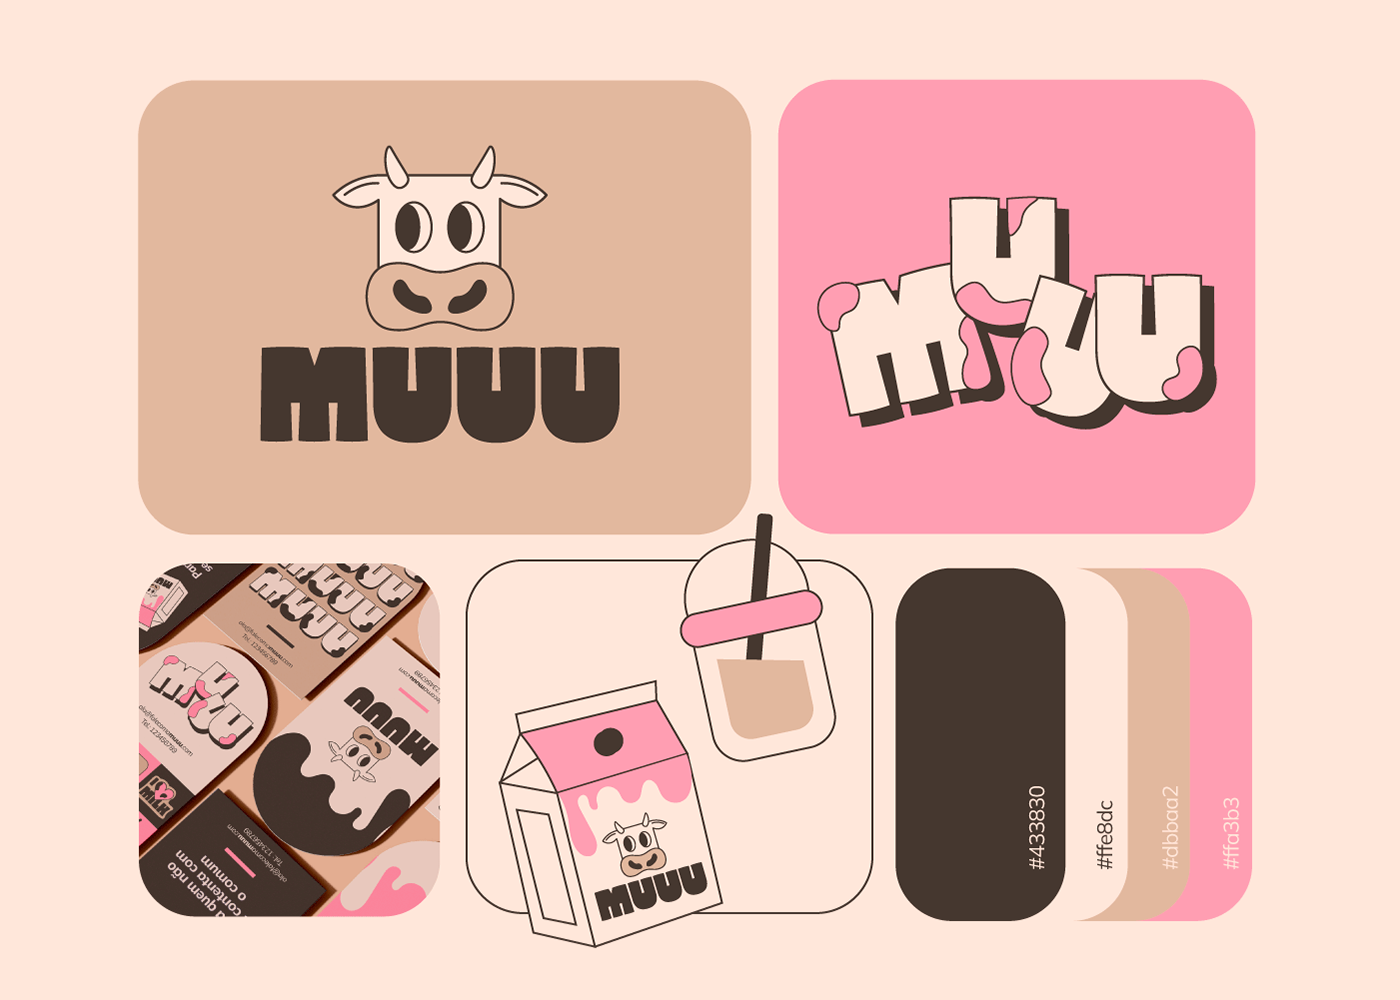 Artifact from the Experience Delight: Muuu Packaging Design & Visual Identity article on Abduzeedo